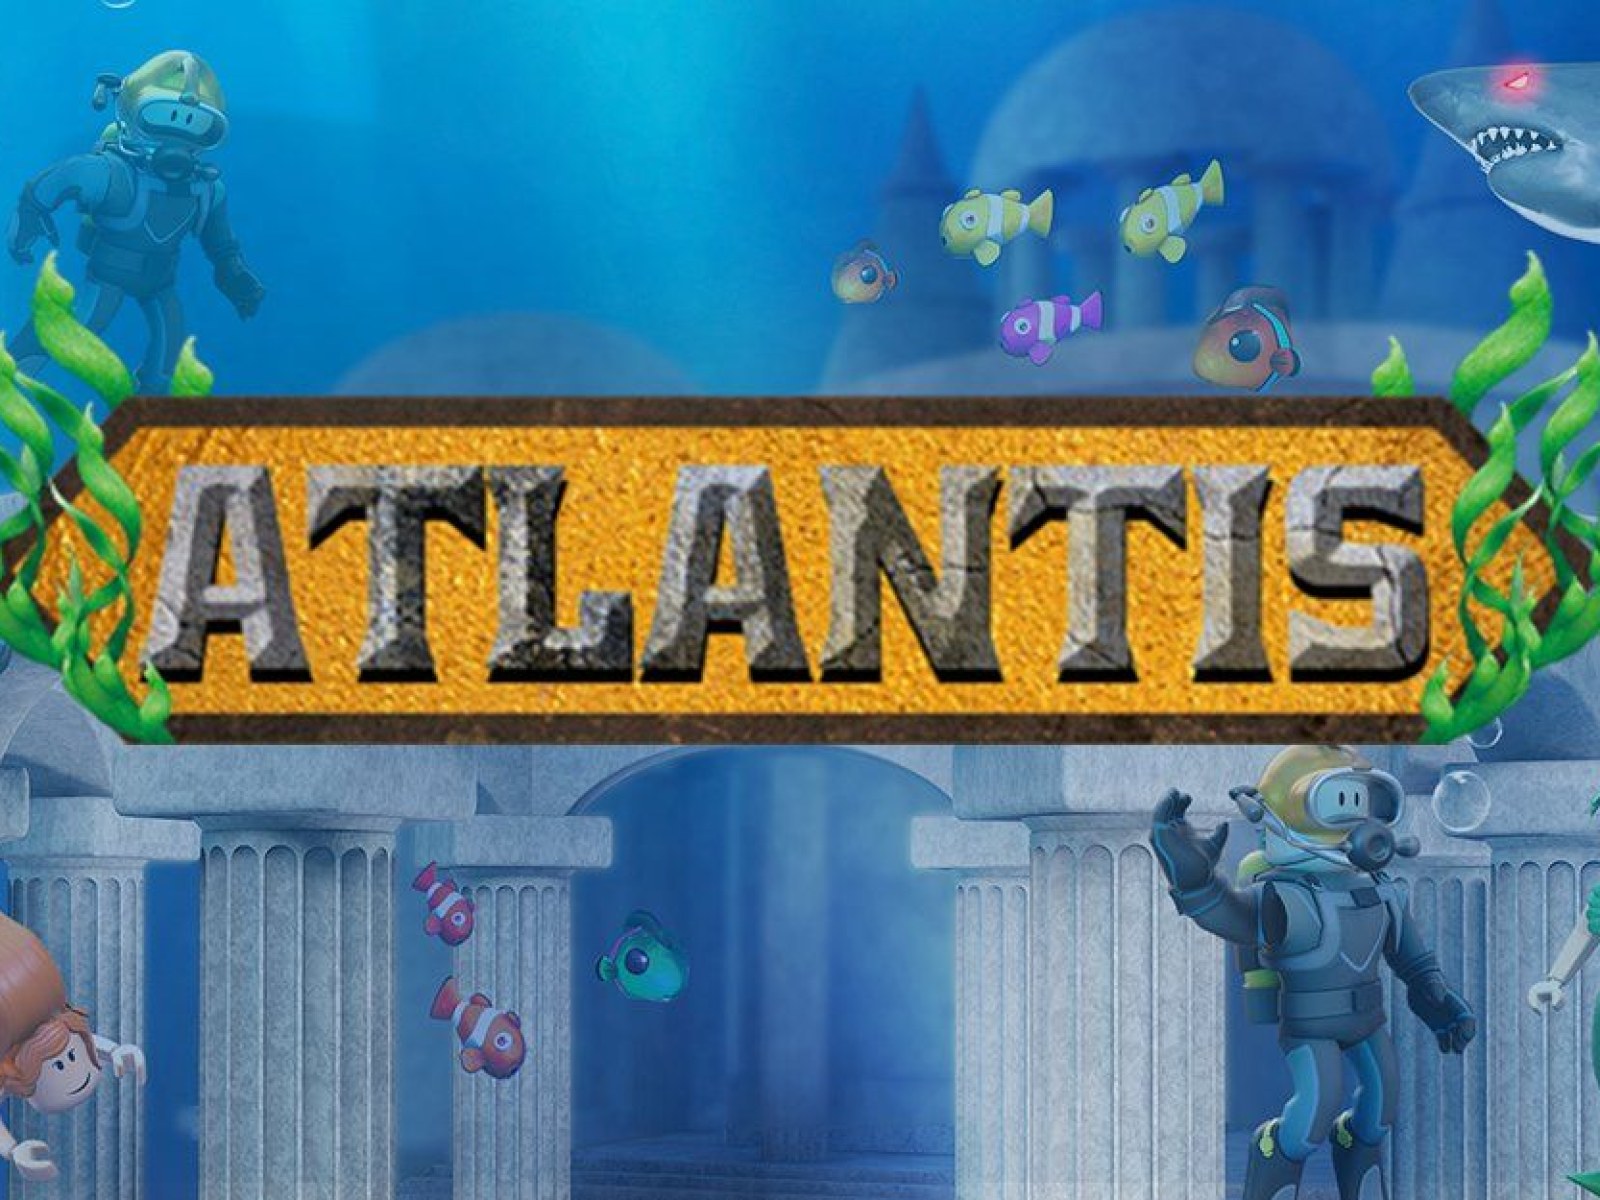 Roblox Atlantis Event Guide How To Get Atlantean Pauldrons And Tiara In Disaster Island Walkthrough - roblox codes for disaster island